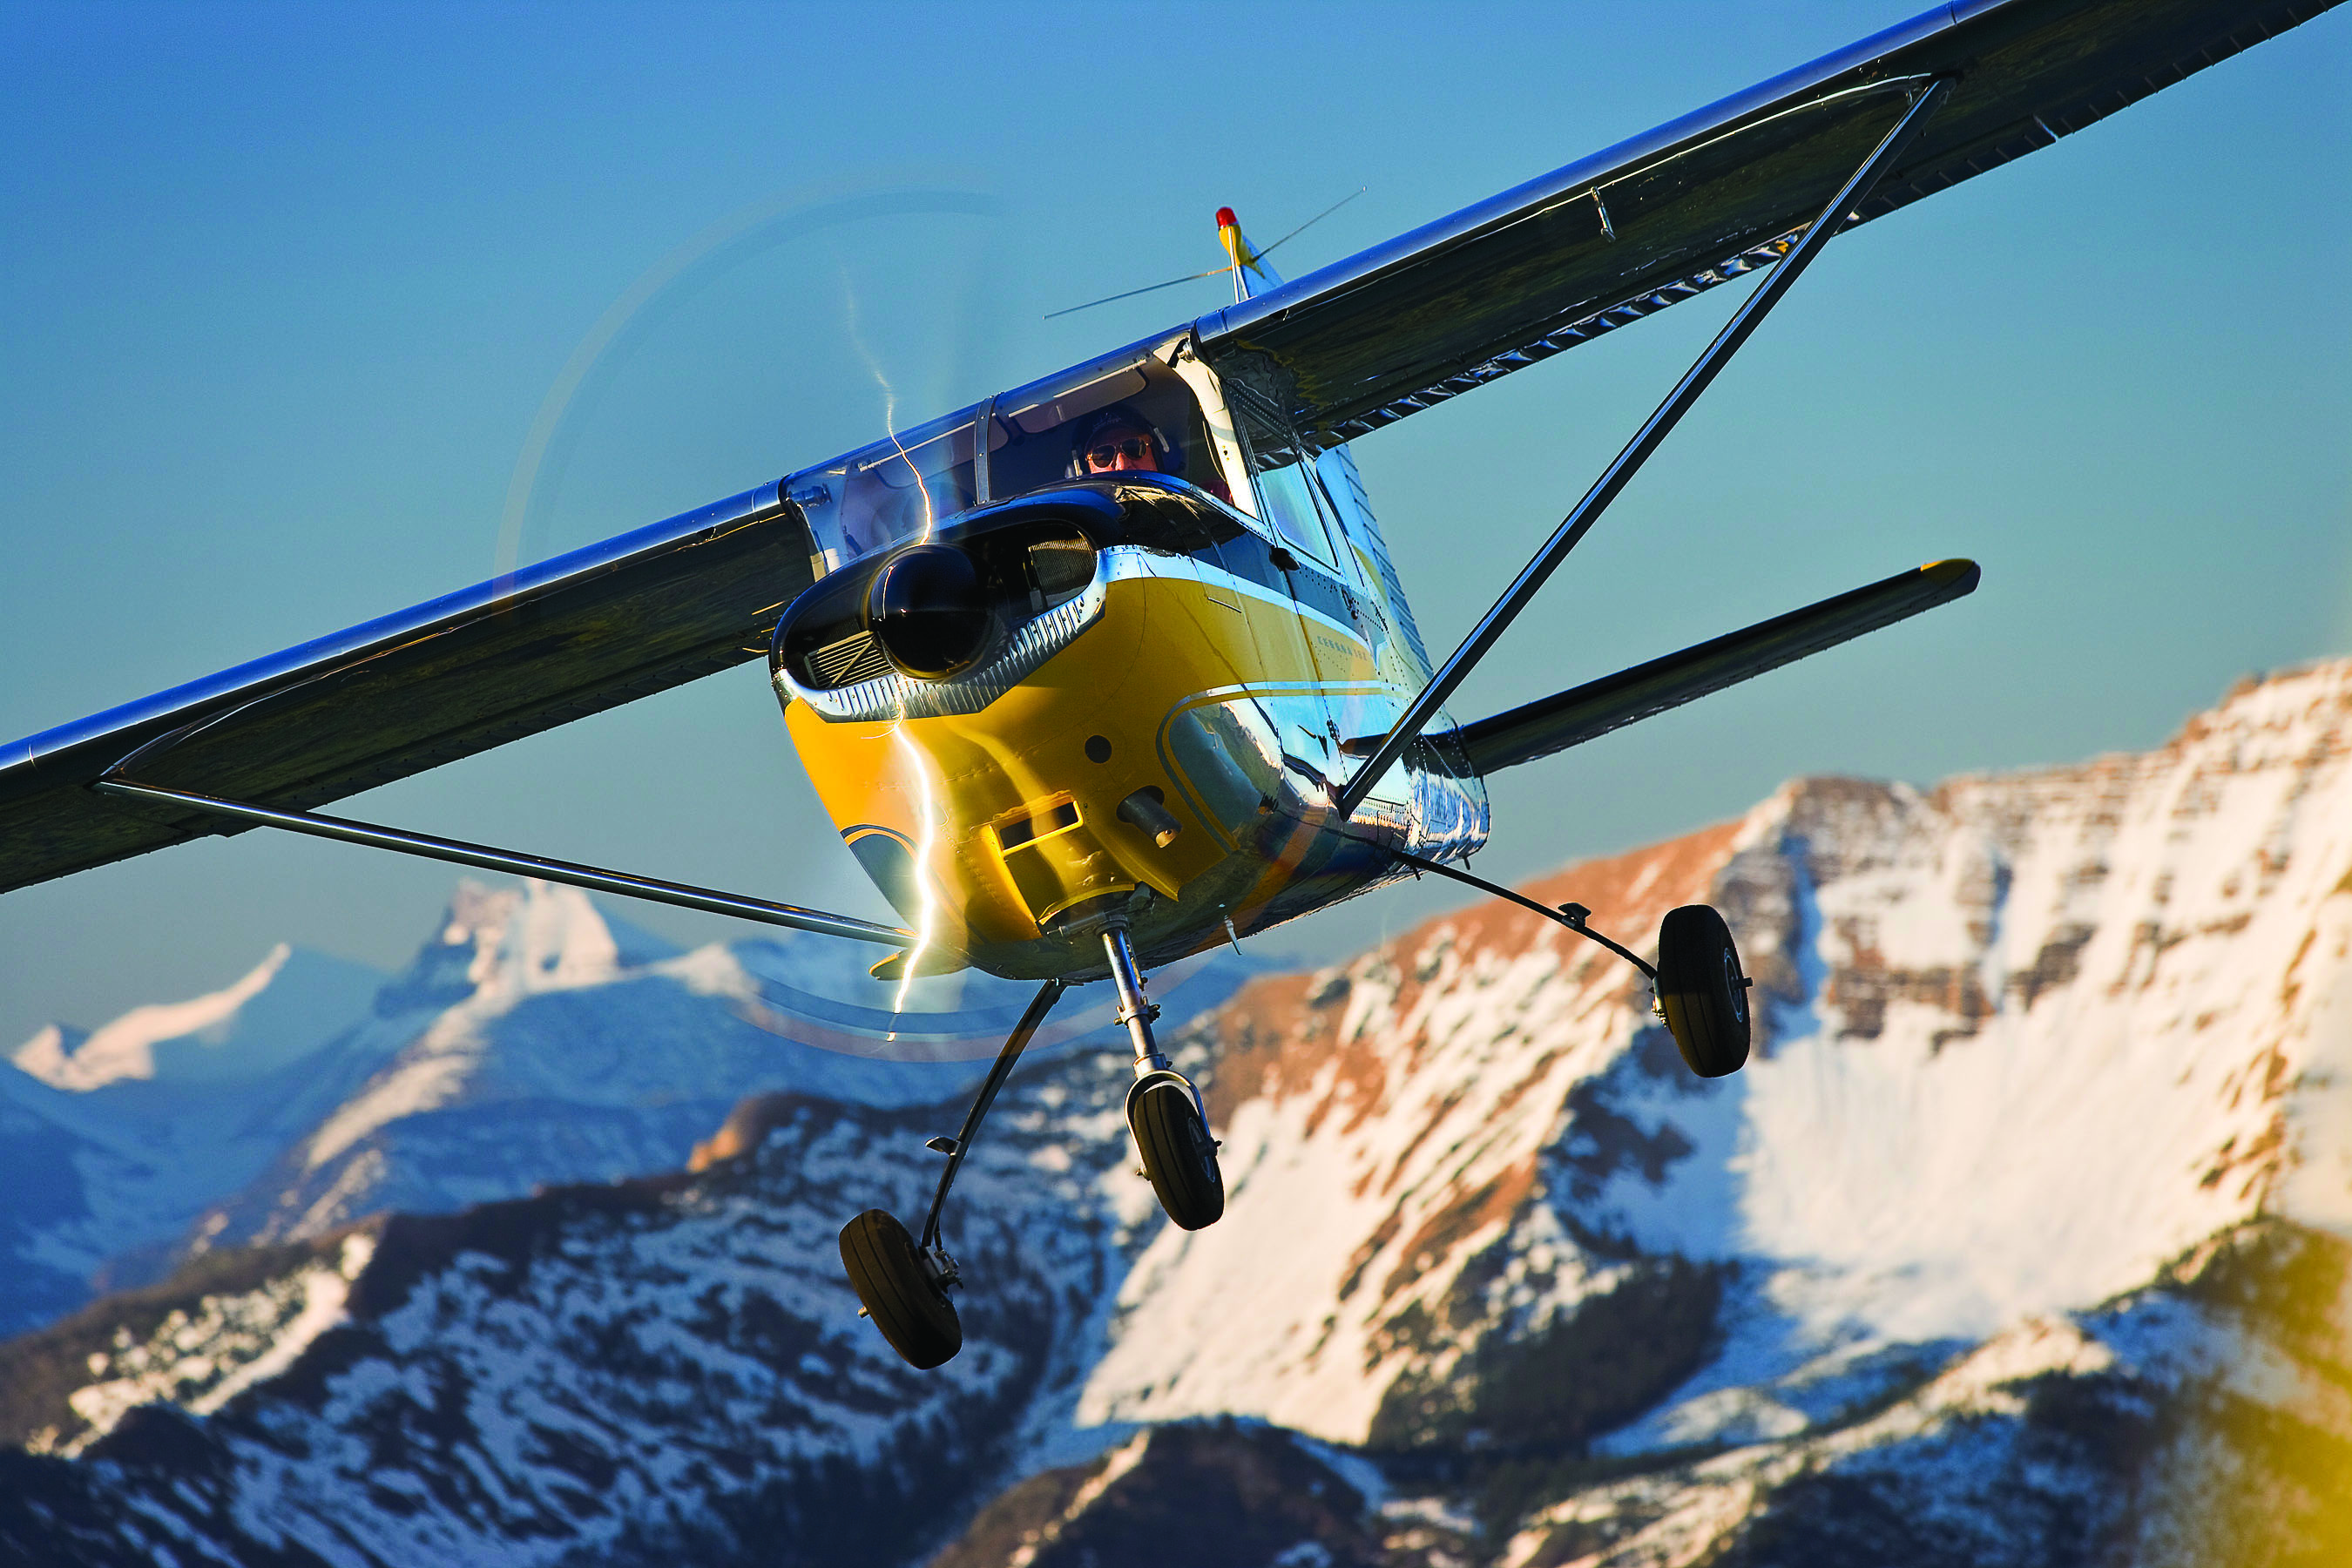 The first production Cessna 182 shows off over Montana's Glacier National Park. The long and spindly landing gear legs were shortened in subsequent models to make it easier to climb in and out of the cabin.